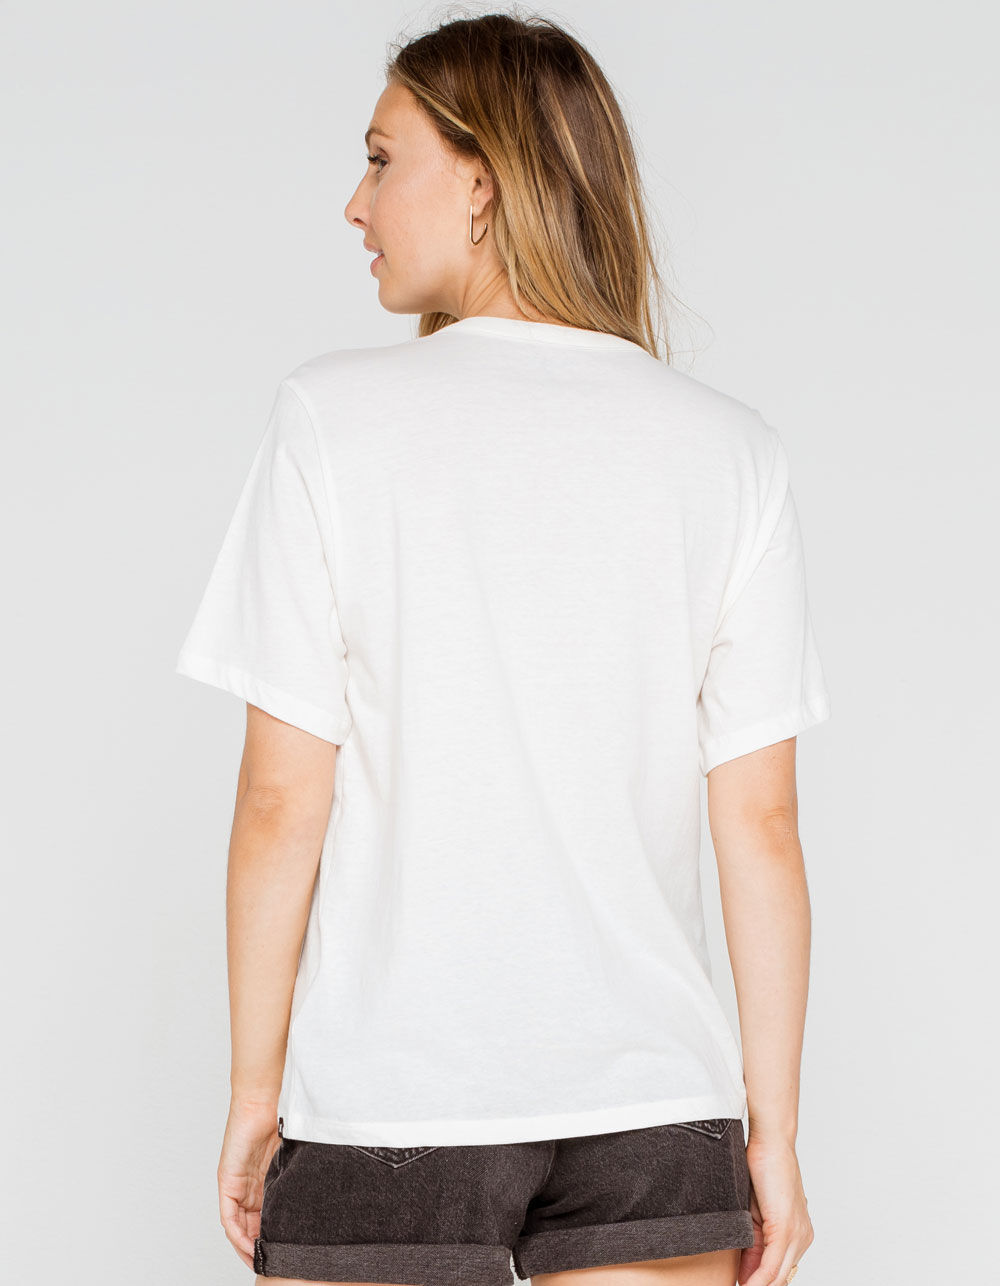 HURLEY Retro Wave Womens Tee - OFF WHITE | Tillys